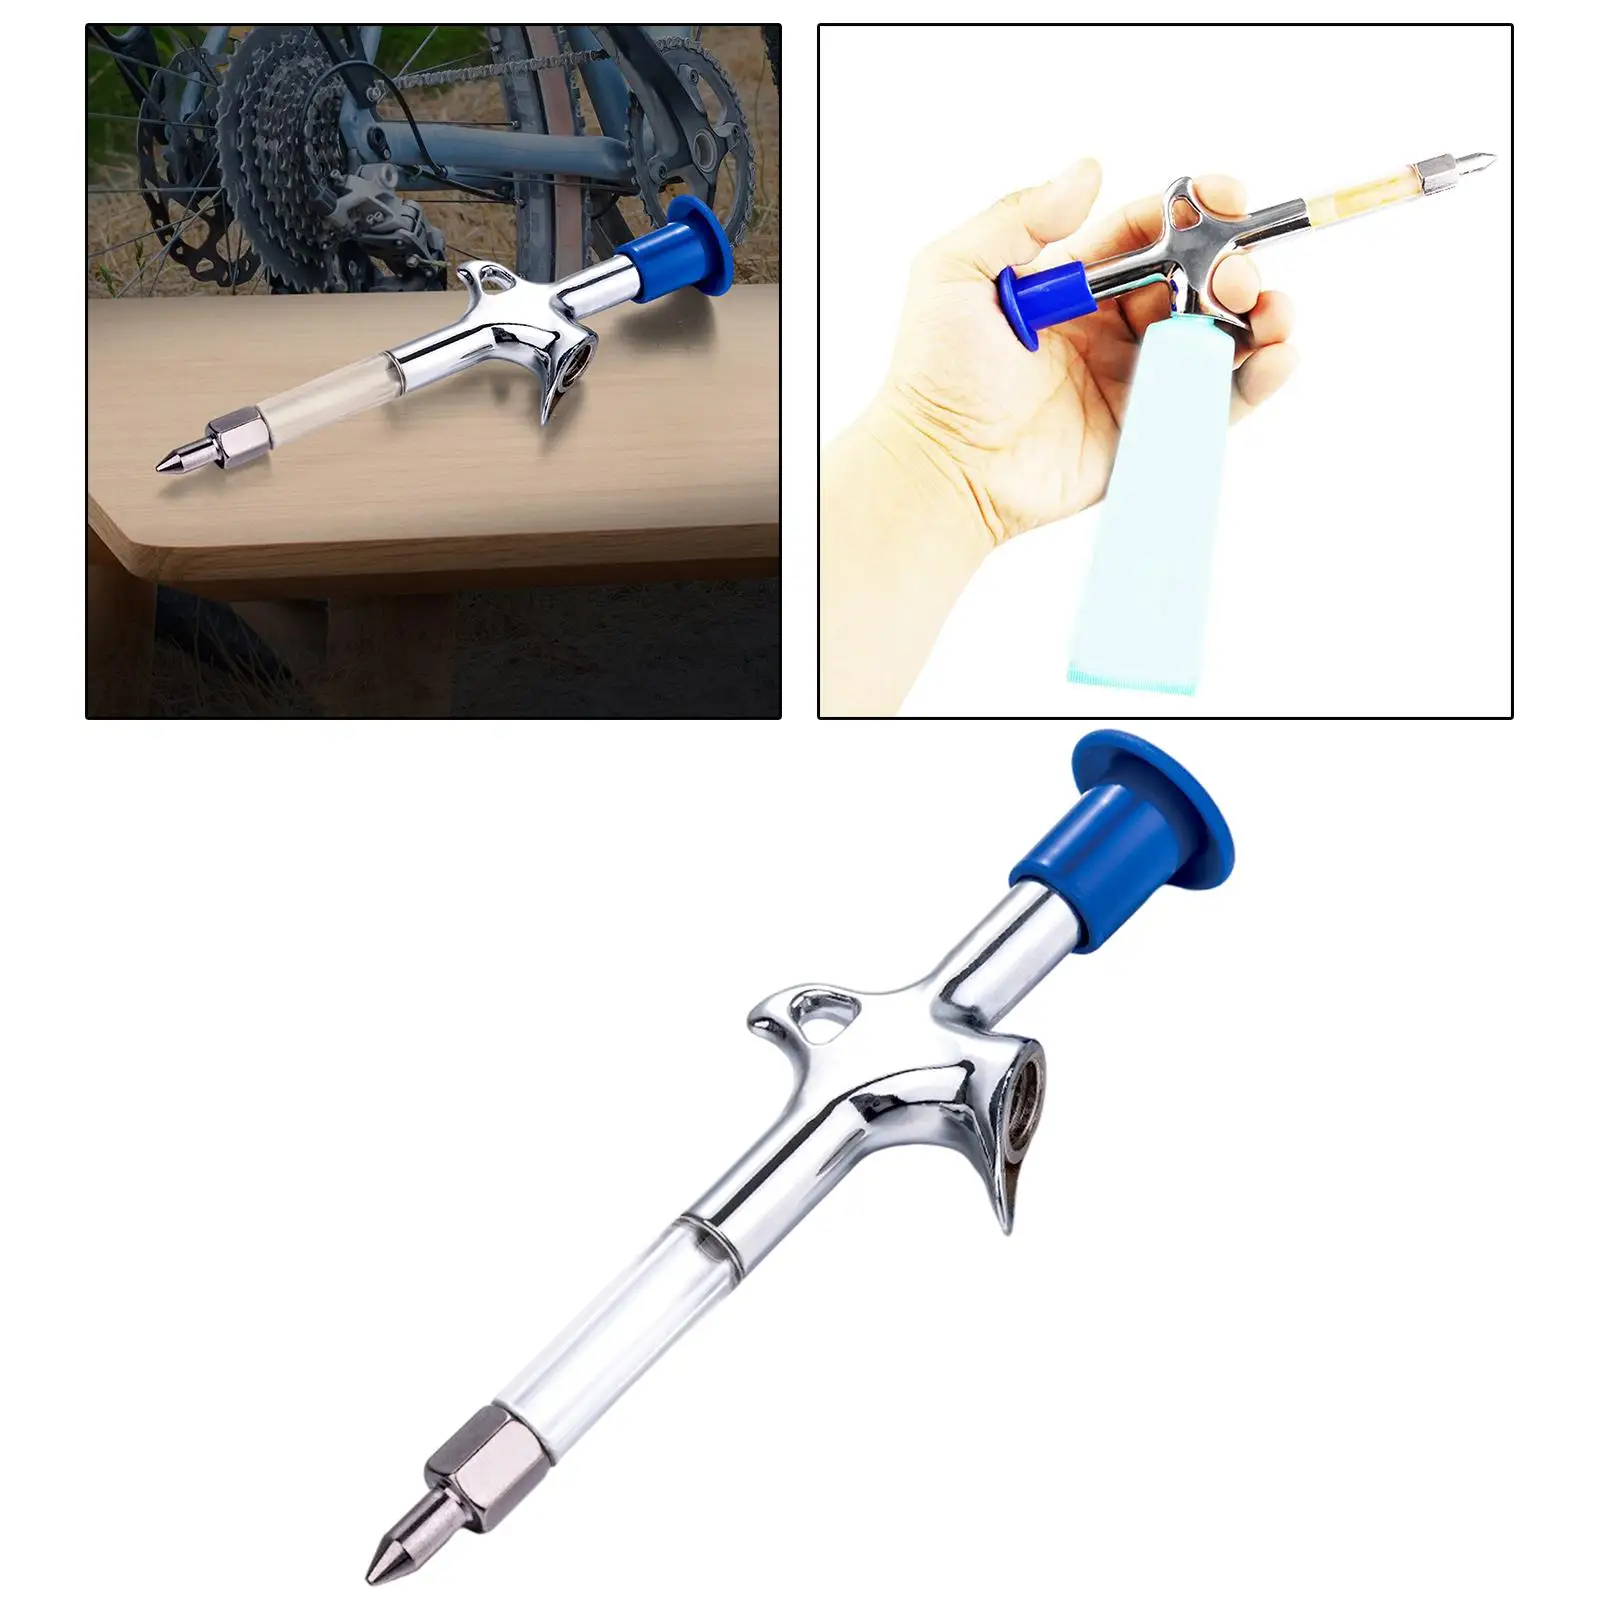 Bike Grease Gun Lubricating Oil Syringe Bicycle Grease Injector Gun for Pedals